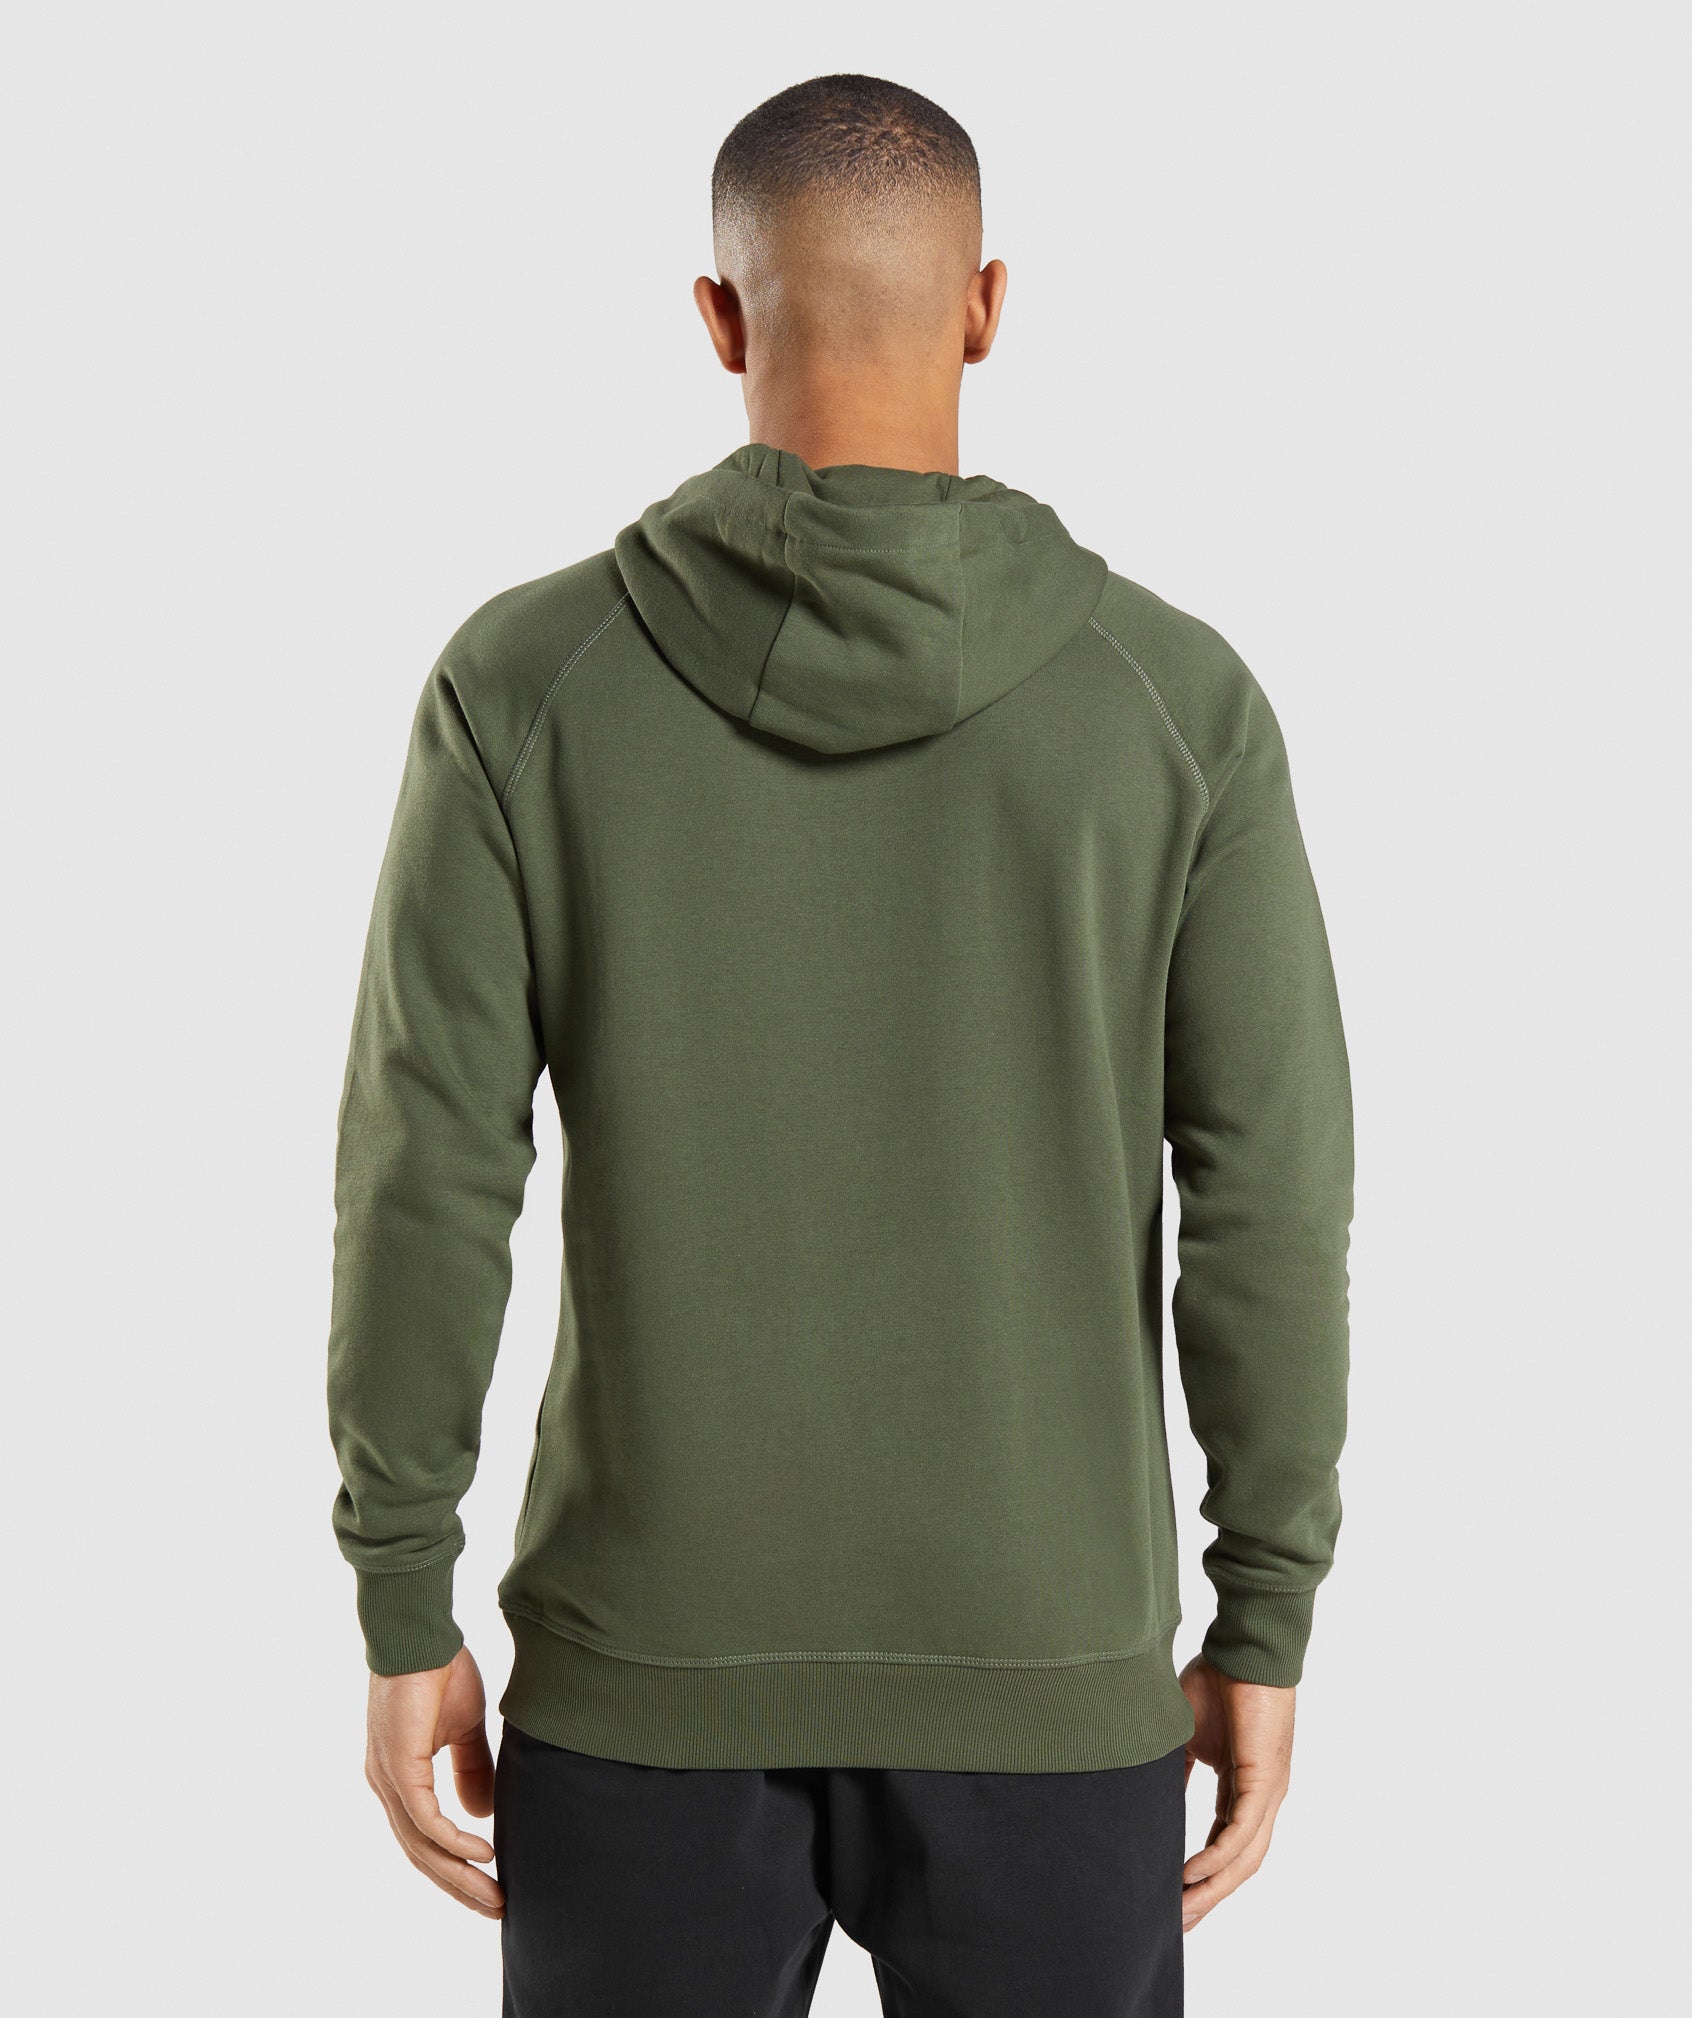 Crest Hoodie in Core Olive - view 2